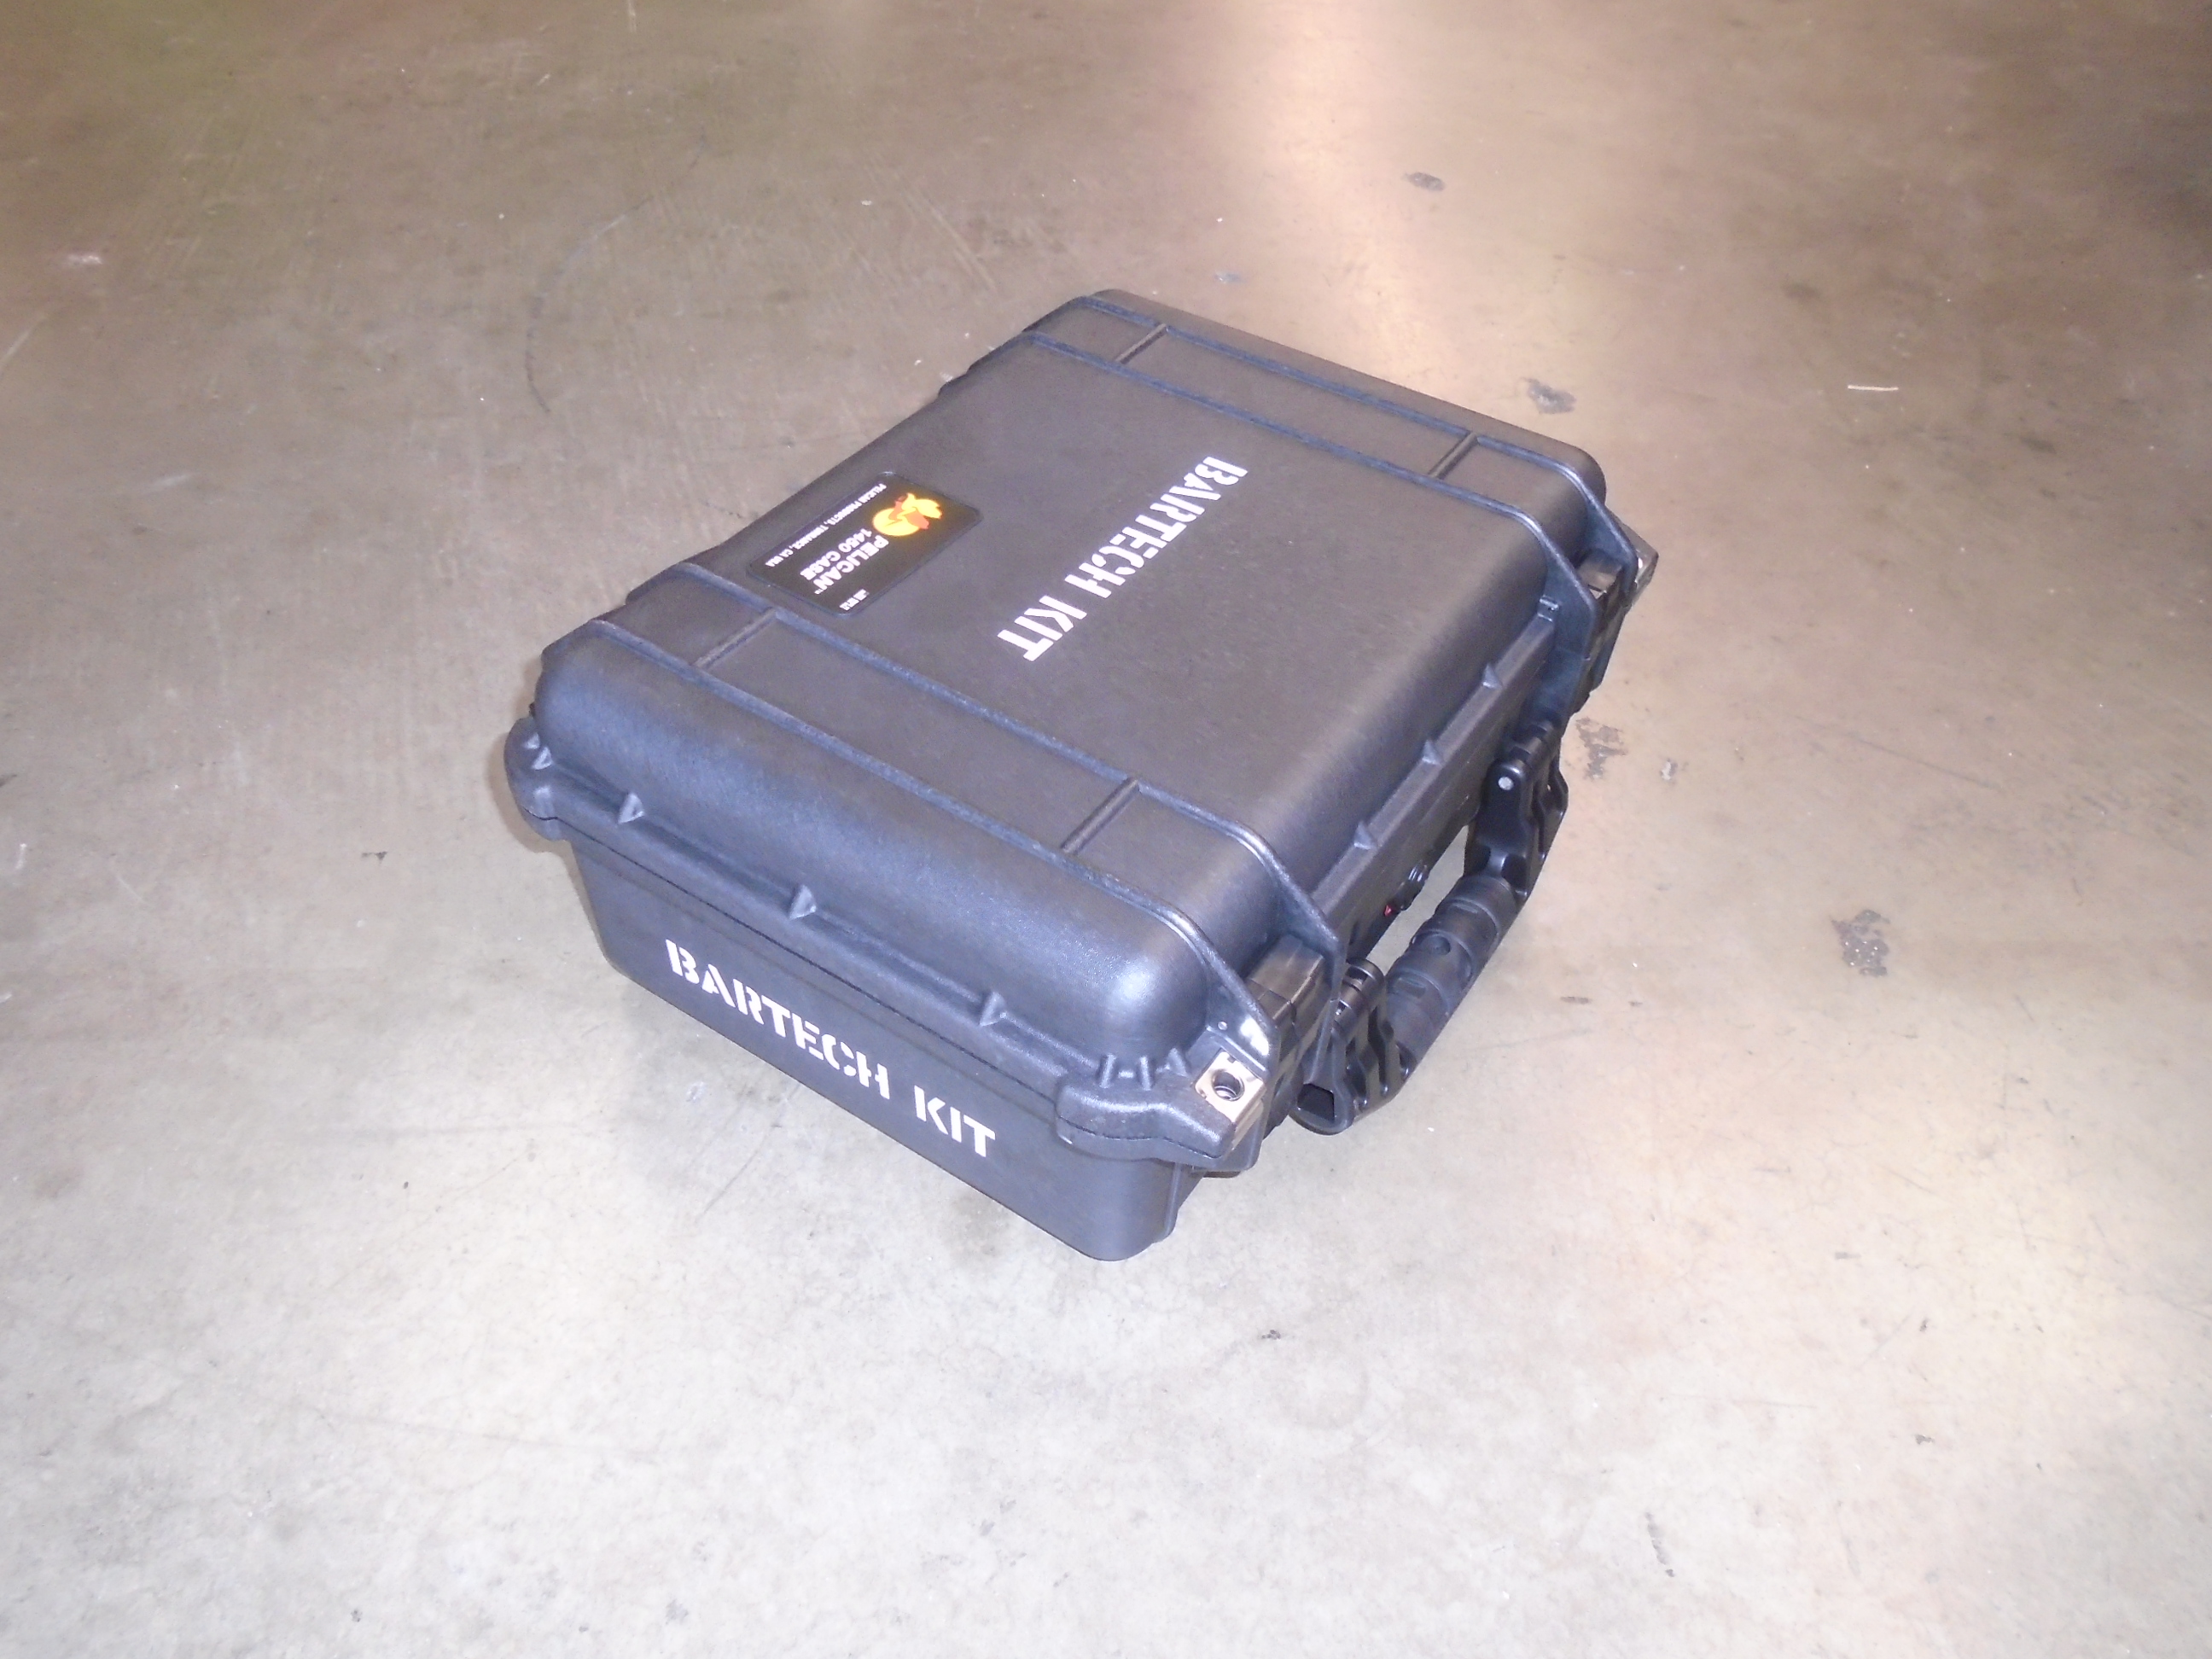 Print # 7260 - Retrofit Existing Pelican 1450 for Bartech Wireless Kit By Nelson Case Corp